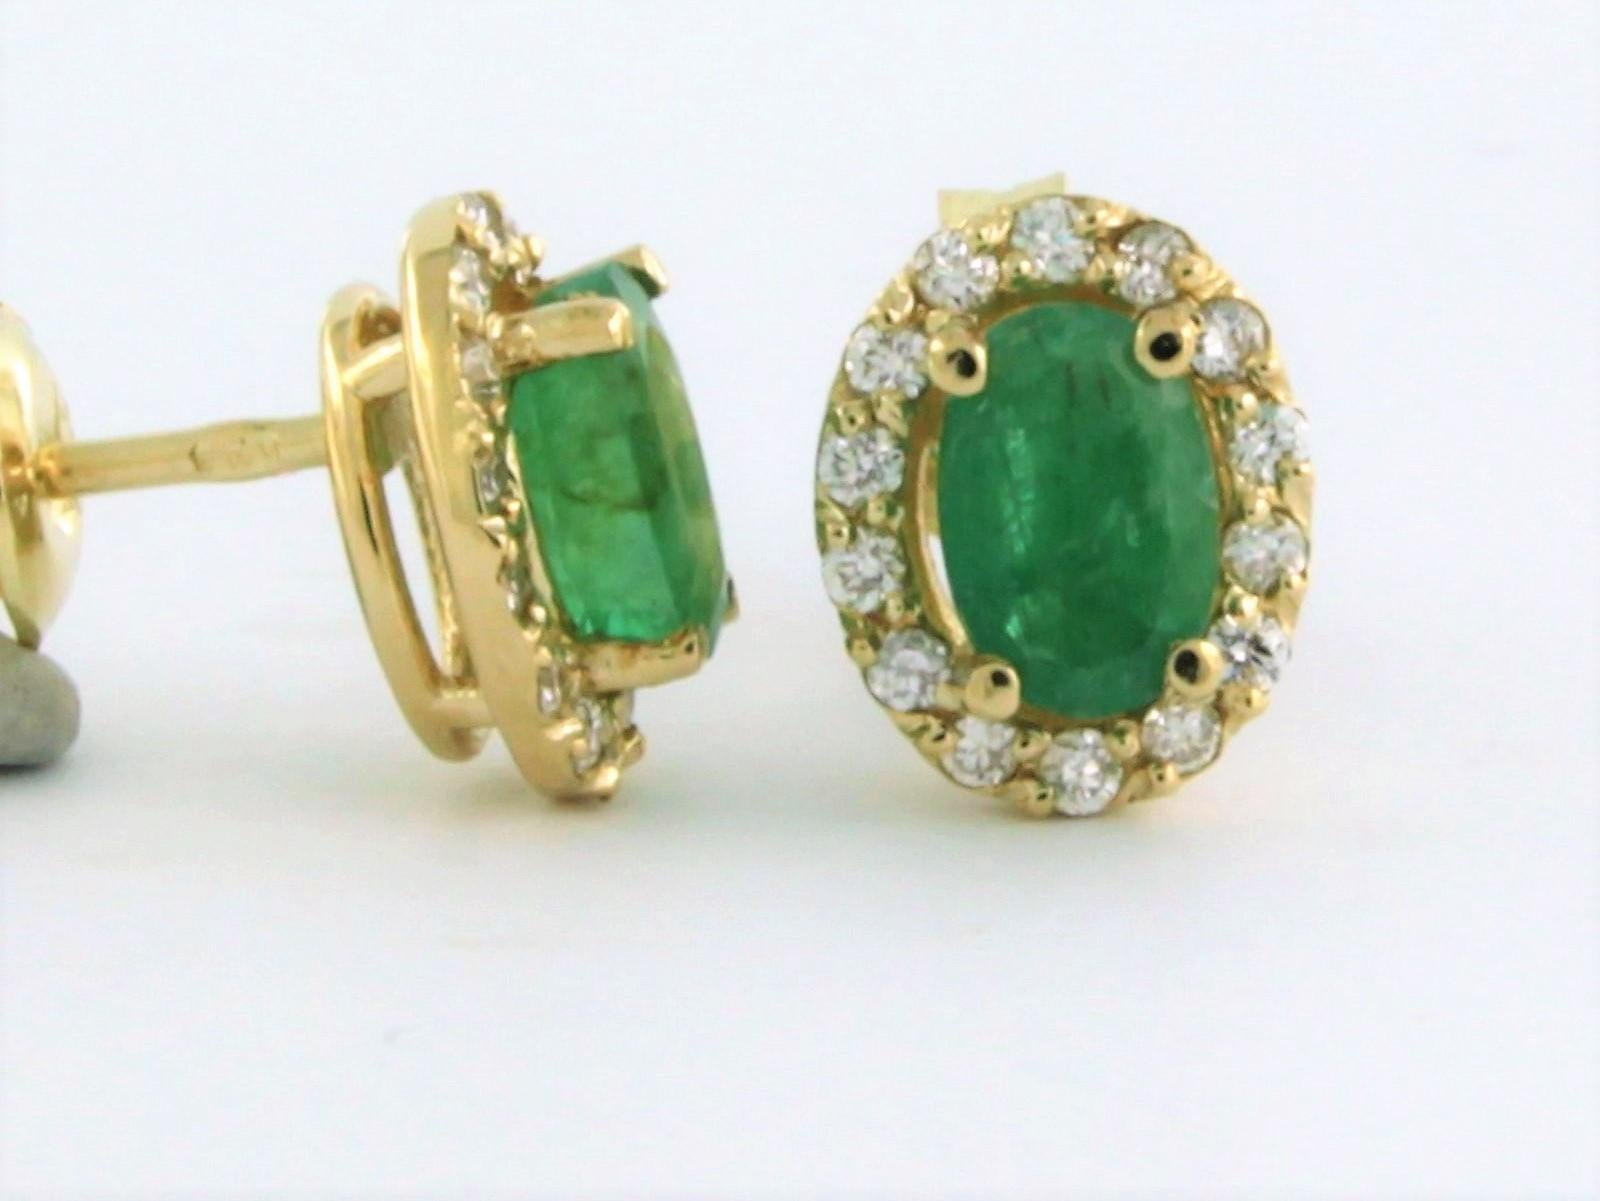 Brilliant Cut Cluster earrings studs set with emerald and diamonds 14k yellow gold For Sale